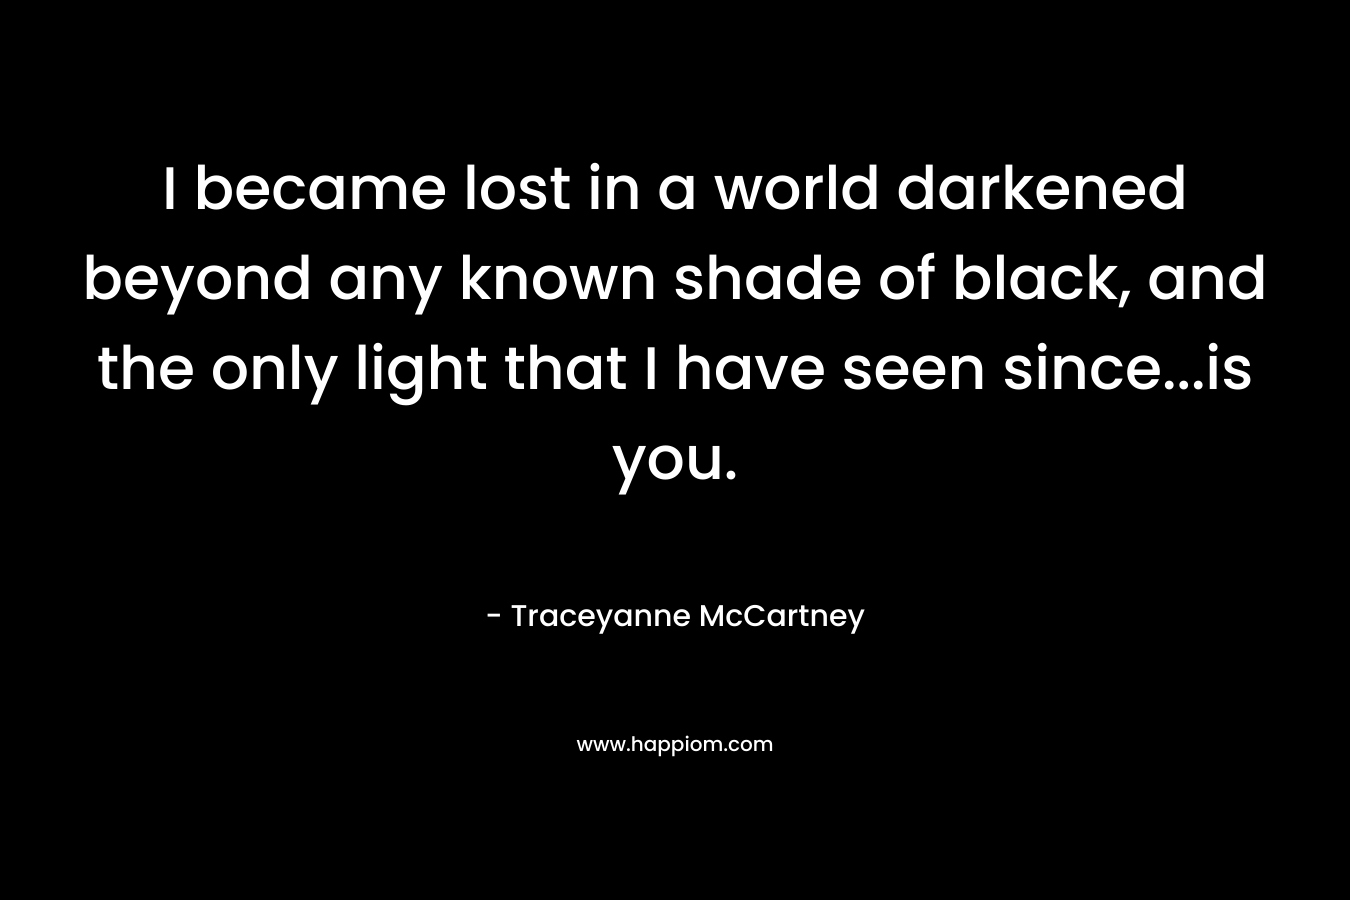 I became lost in a world darkened beyond any known shade of black, and the only light that I have seen since…is you. – Traceyanne McCartney